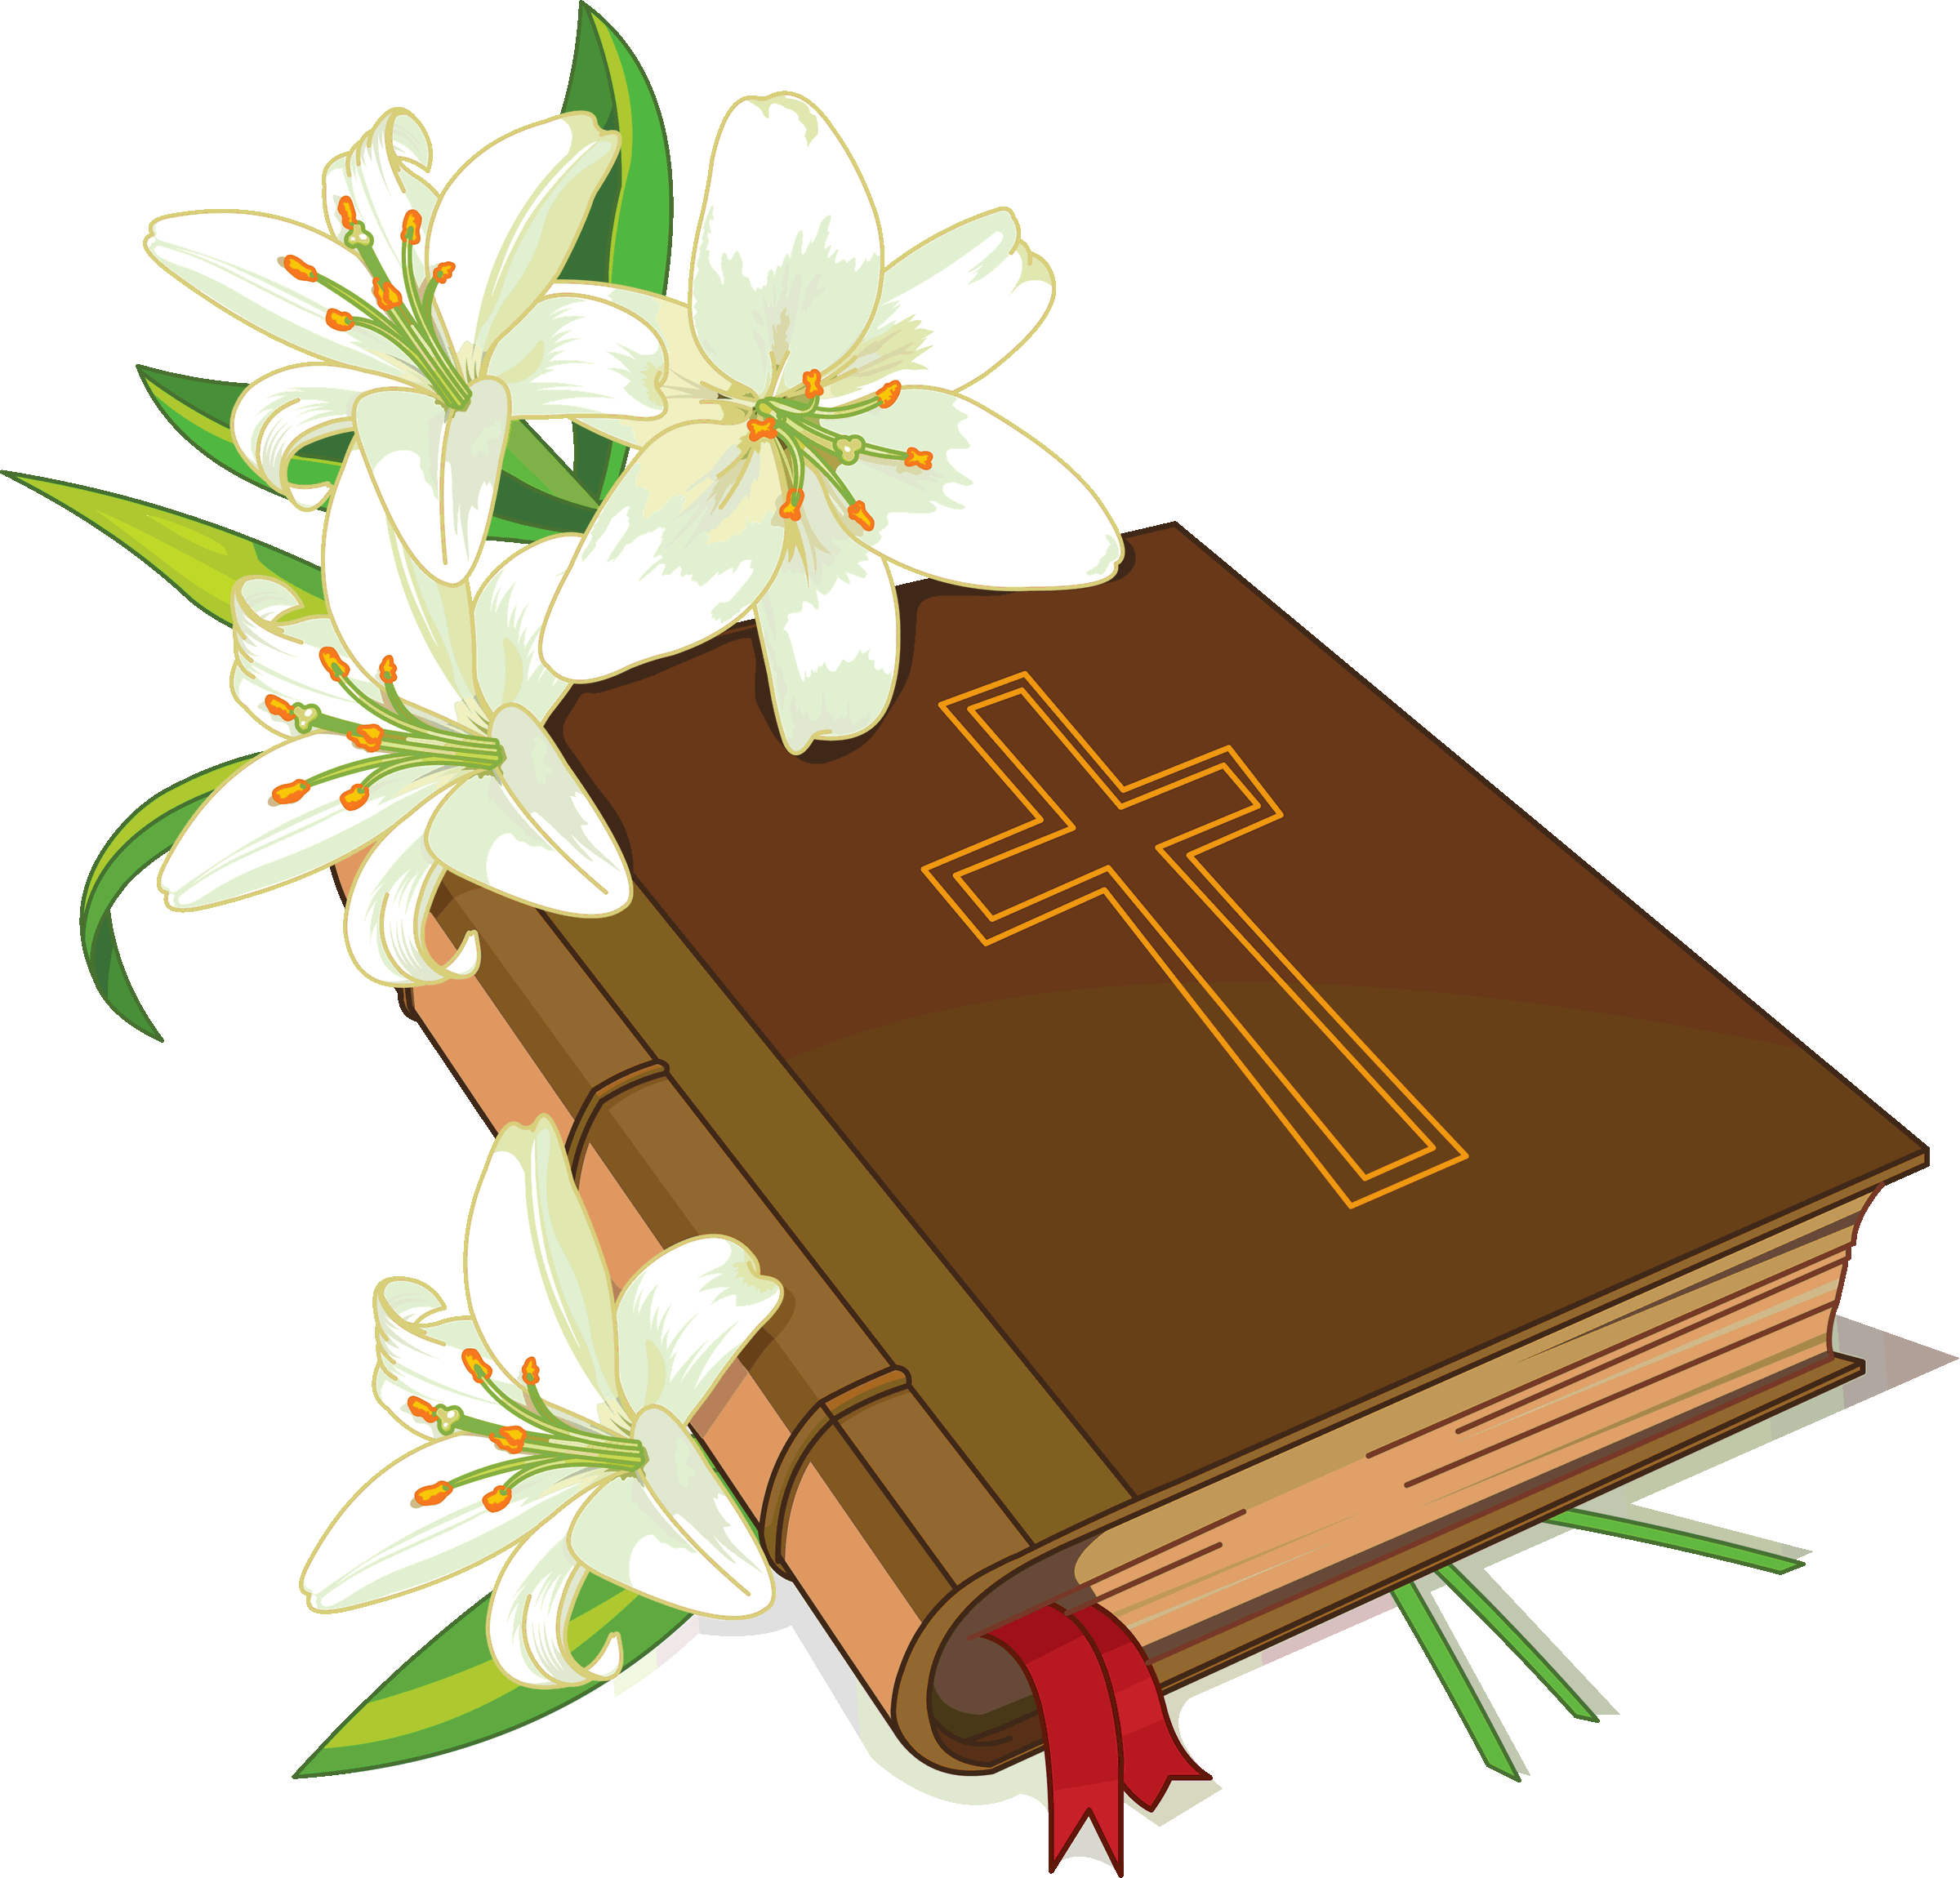 Christian bible and flowers clipart clipartcow